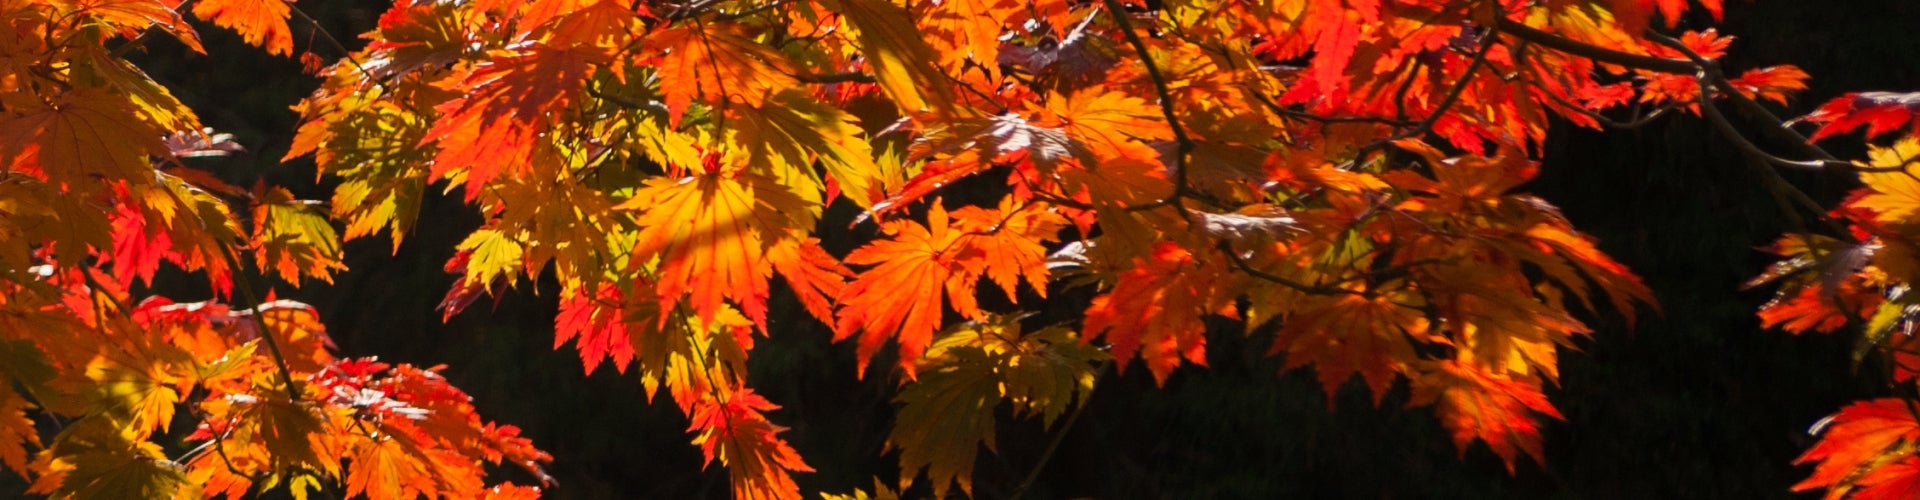 Red, orange, and yellow maples leaves in fall.